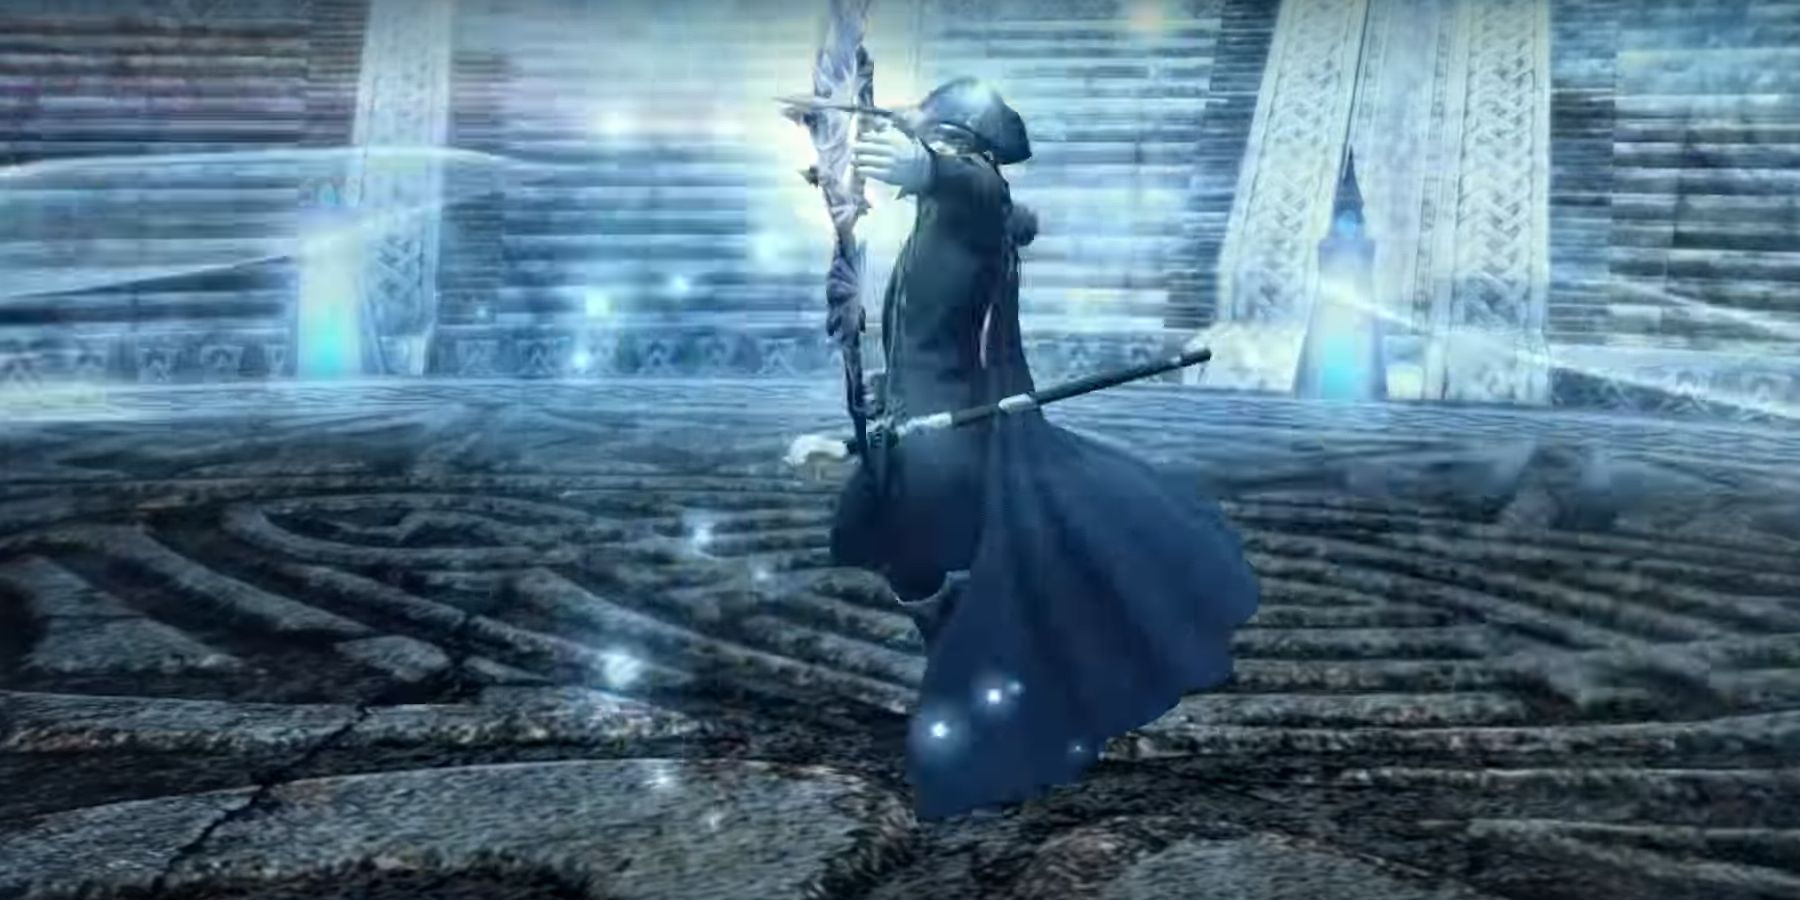 Final Fantasy 14 - a screenshot of Martyn the Blue Mage about to cast a powerful ice spell.